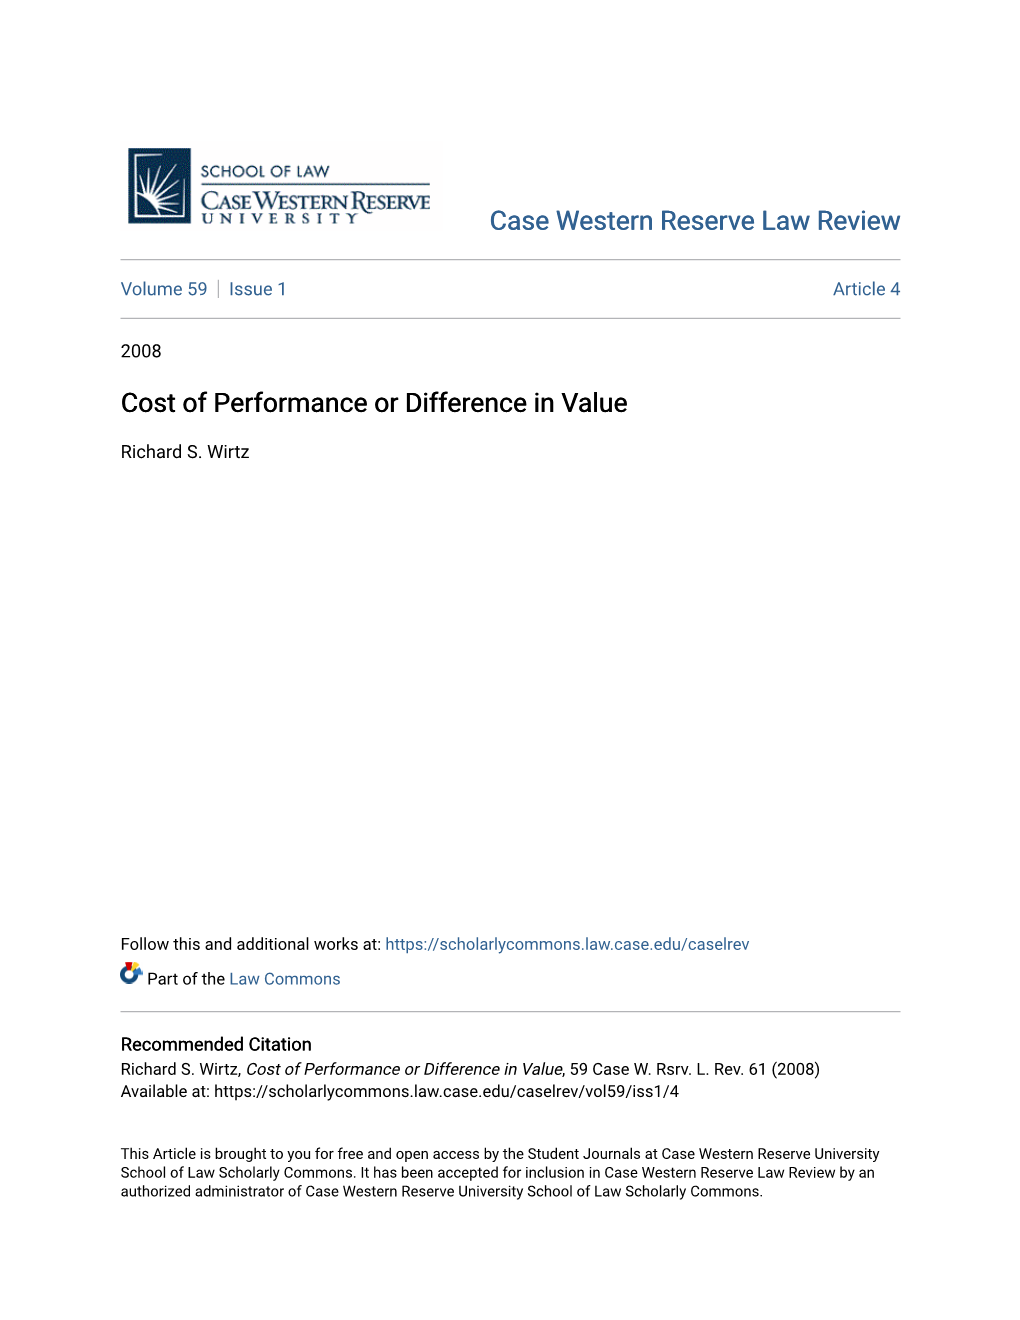 Cost of Performance Or Difference in Value